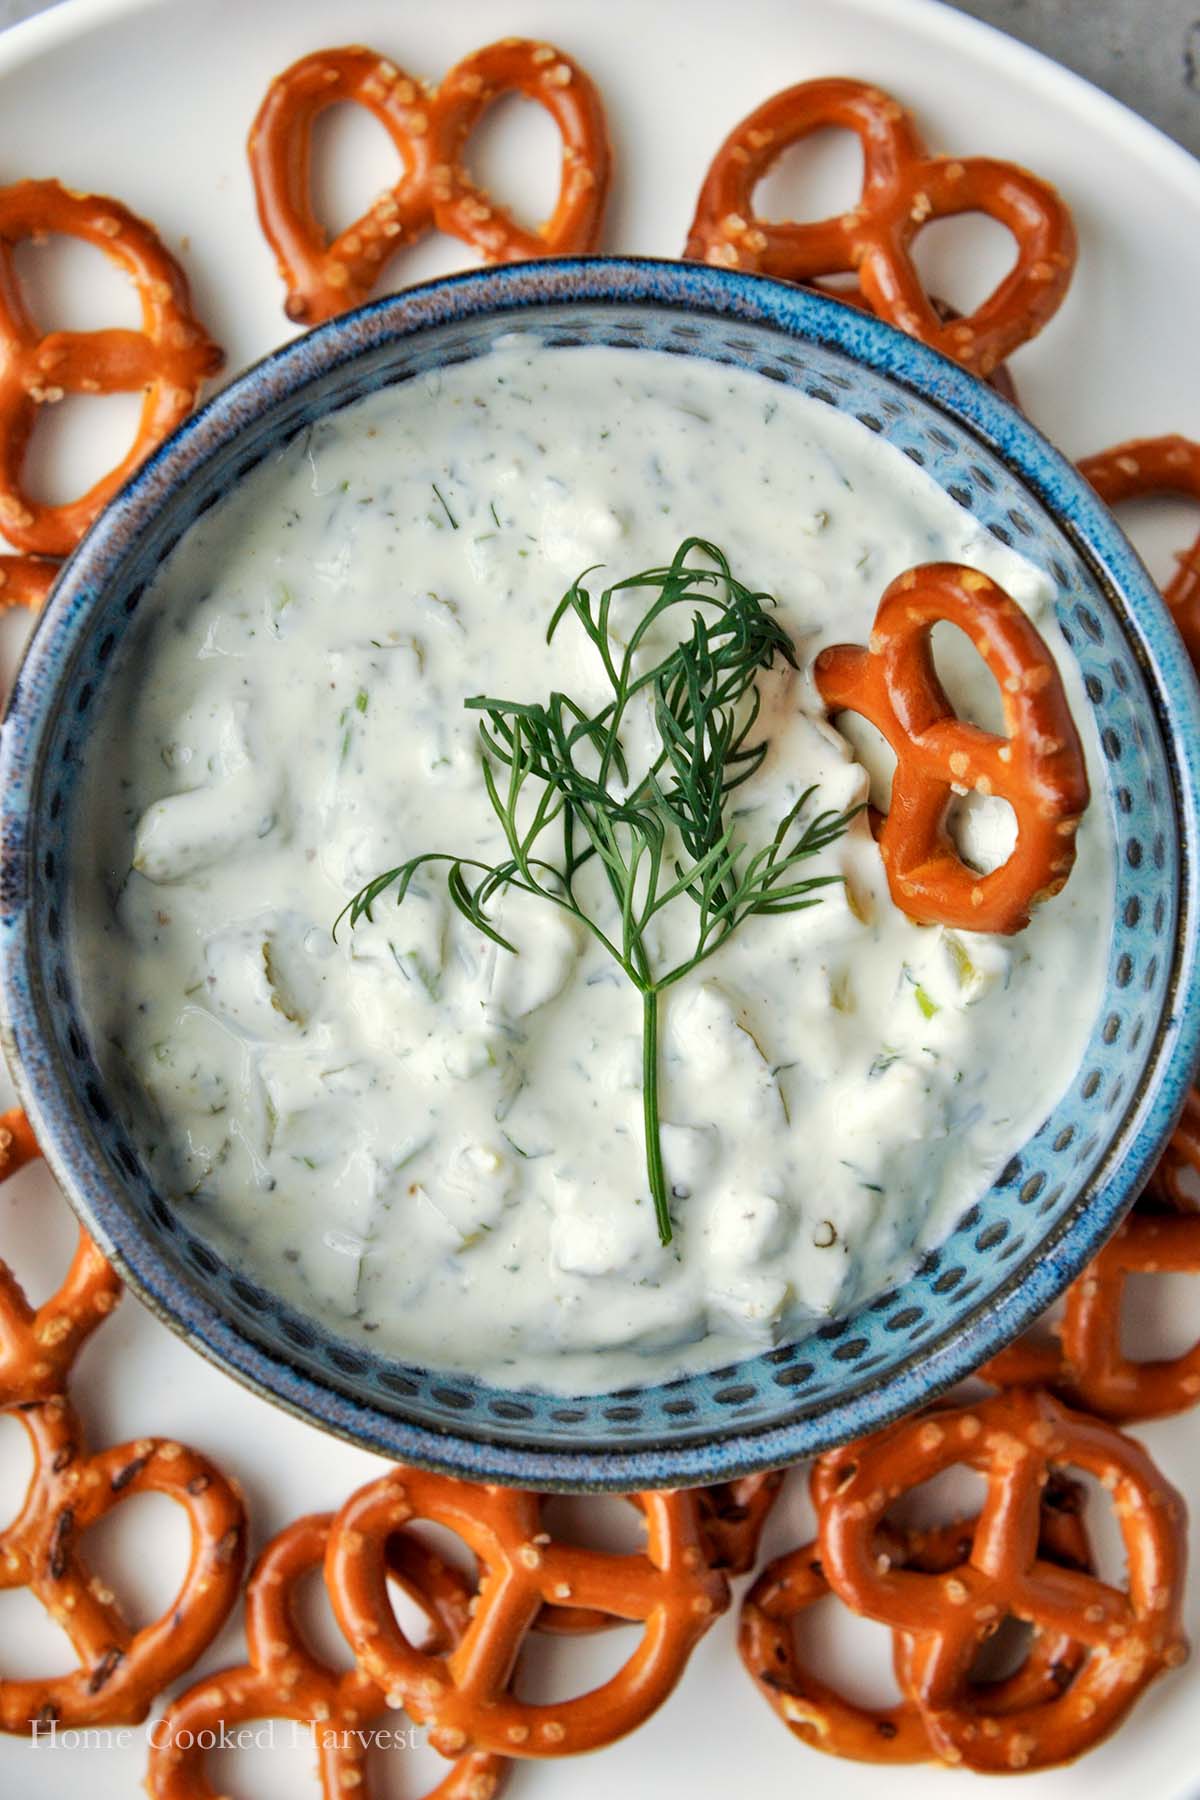 A close up of dill pickle dip with a pretzel in it and a sprig of dill.